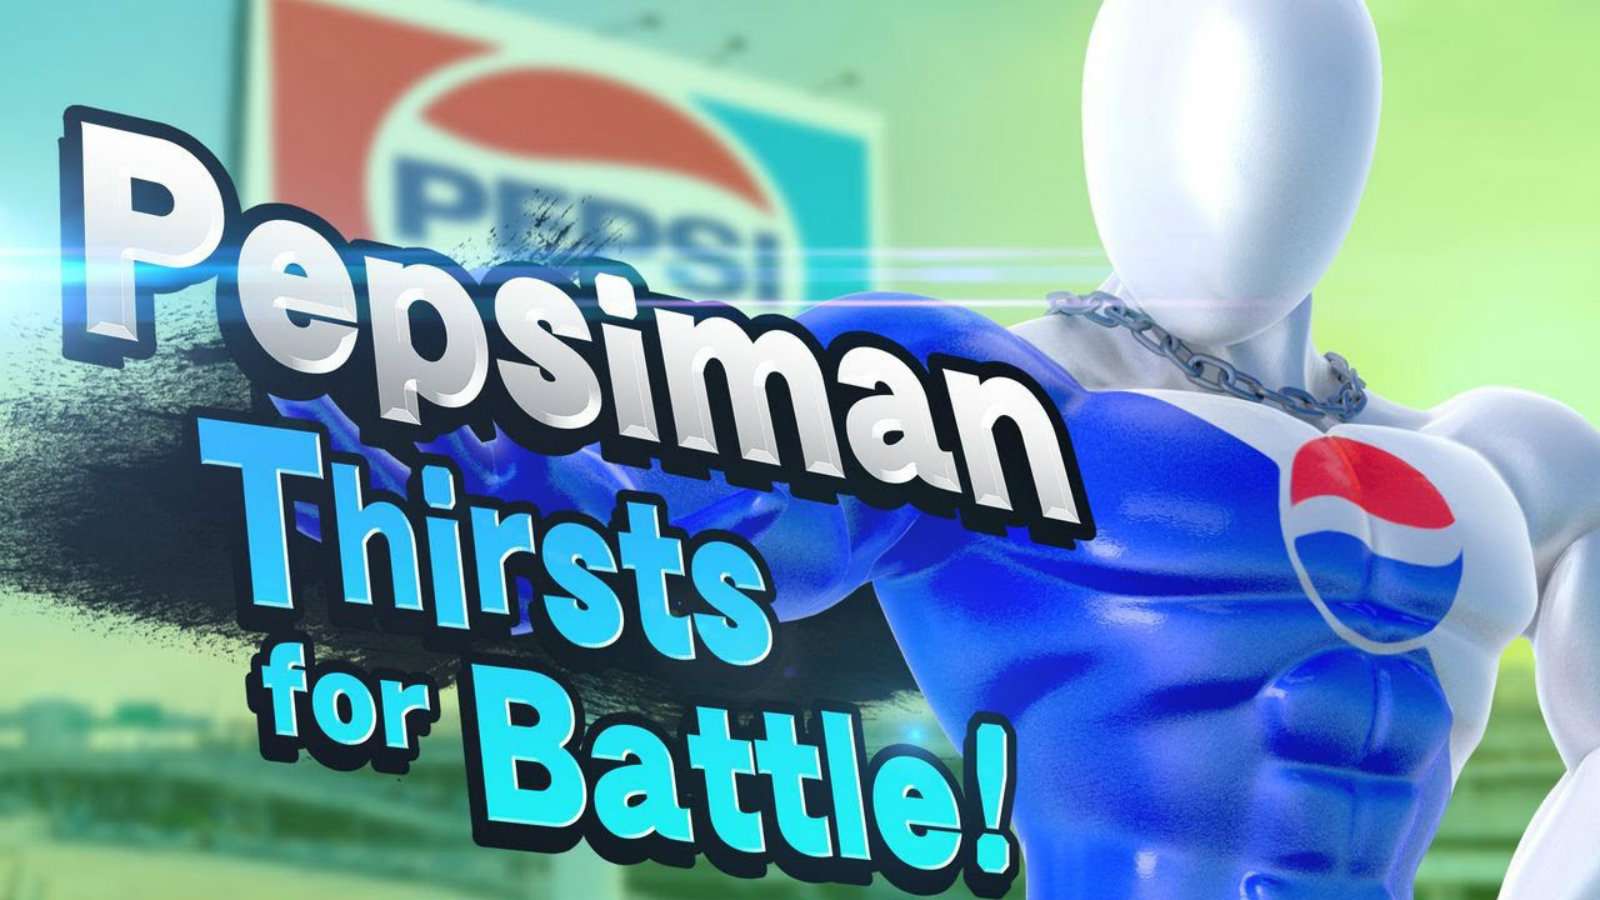 Pepsi Man enters the fight in Smash Ultimate